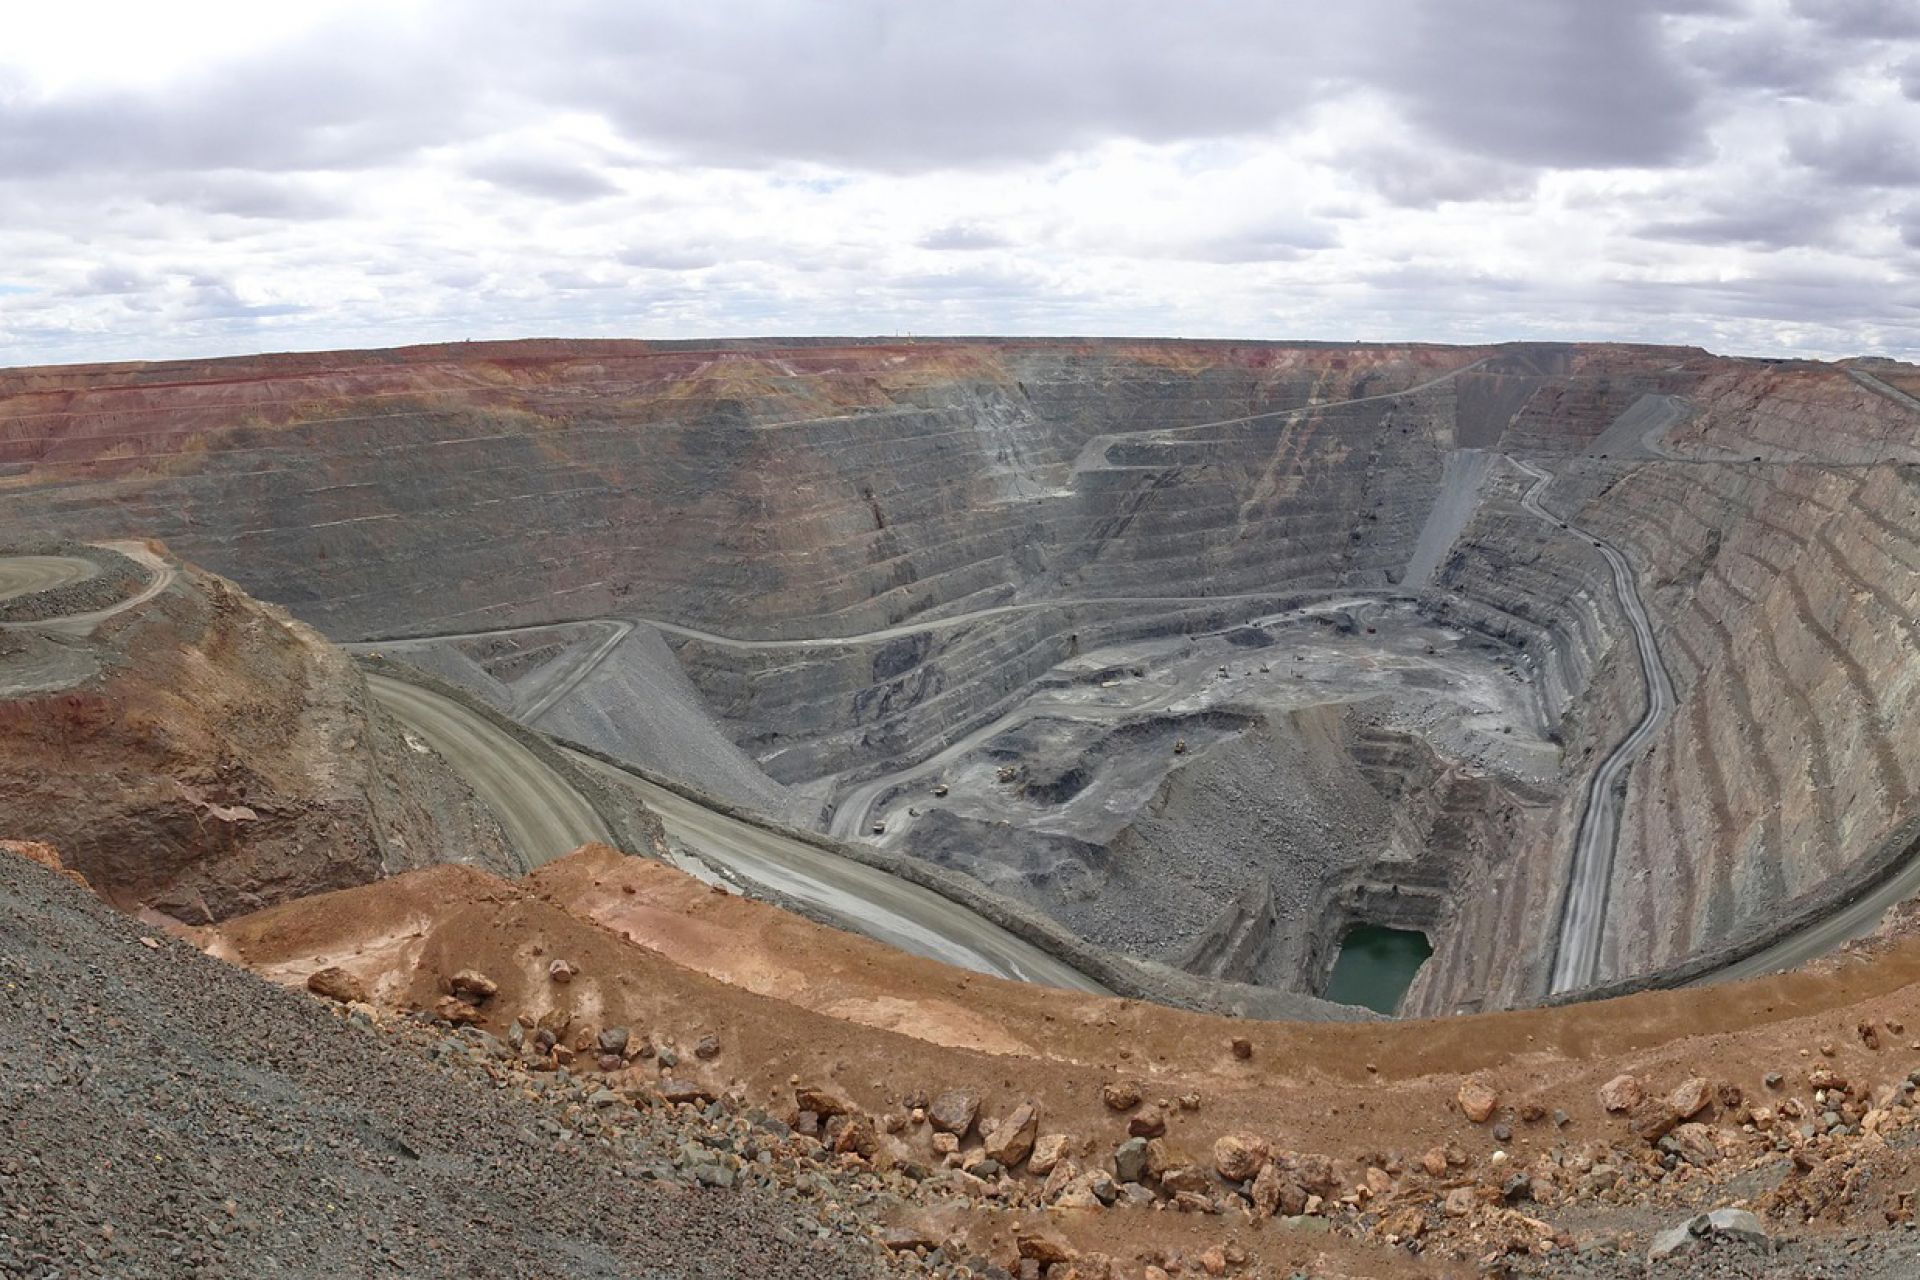 Photo of a gold mine showing the deep cut into the ground